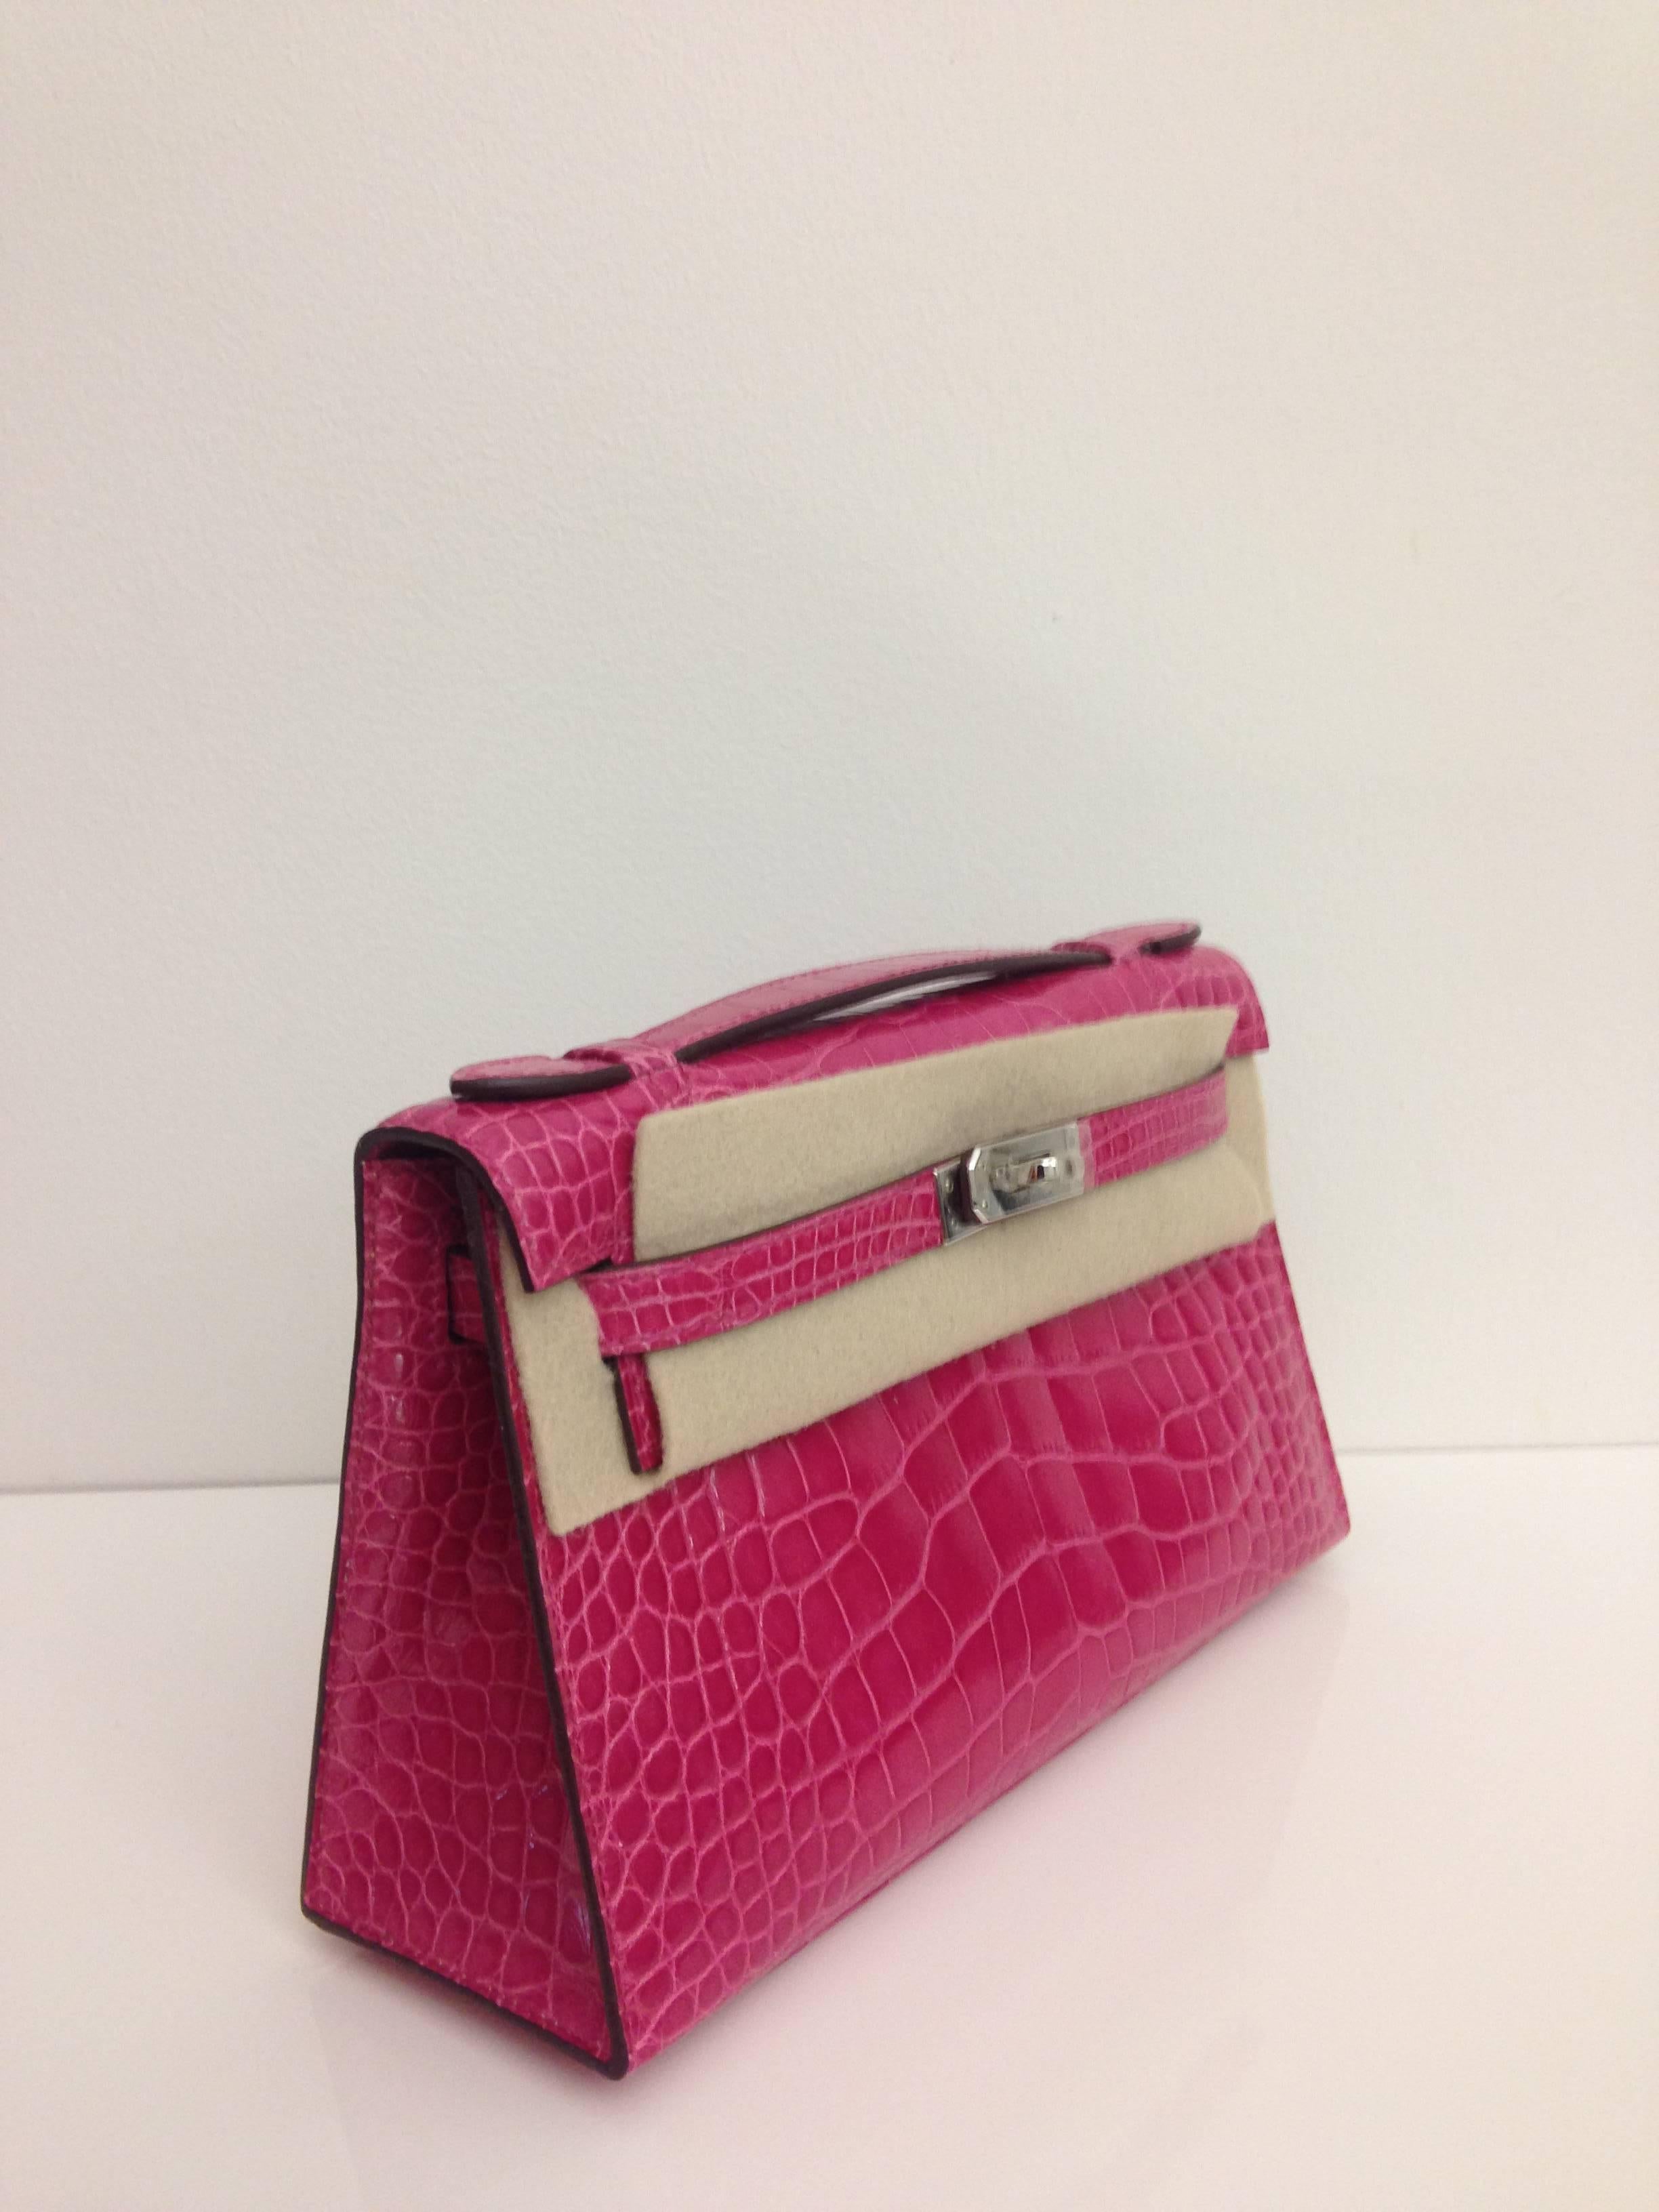 Hermes, Kelly Pochette bag, Colour Fuschia (Hermes have stopped producing this color 5 years ago), Crocodile skin - Alligator, Palladium (silver) hardware.

This Bag comes with a box, dustbag and manual 